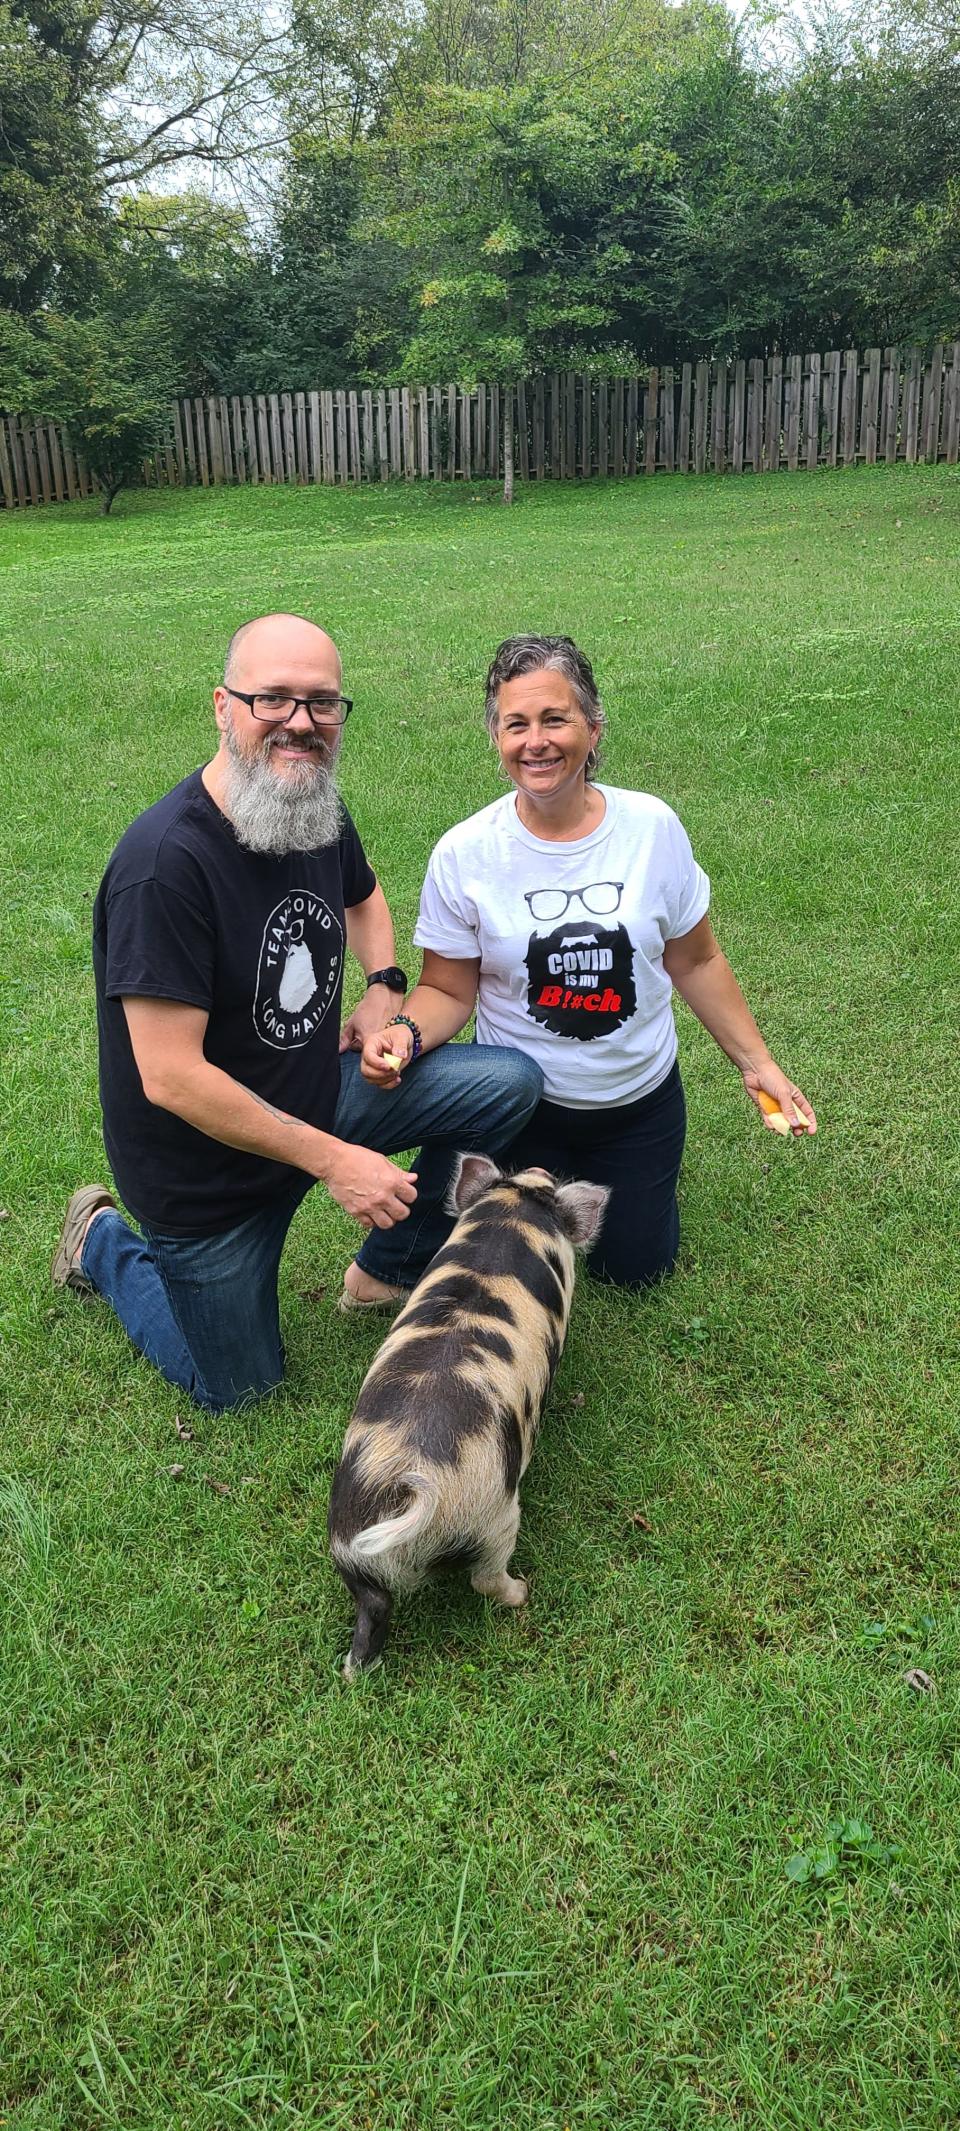 Travis and Shannon Exum with pet pig Tony, the mascot of Team COVID Long Haul. Oct. 12, 2021